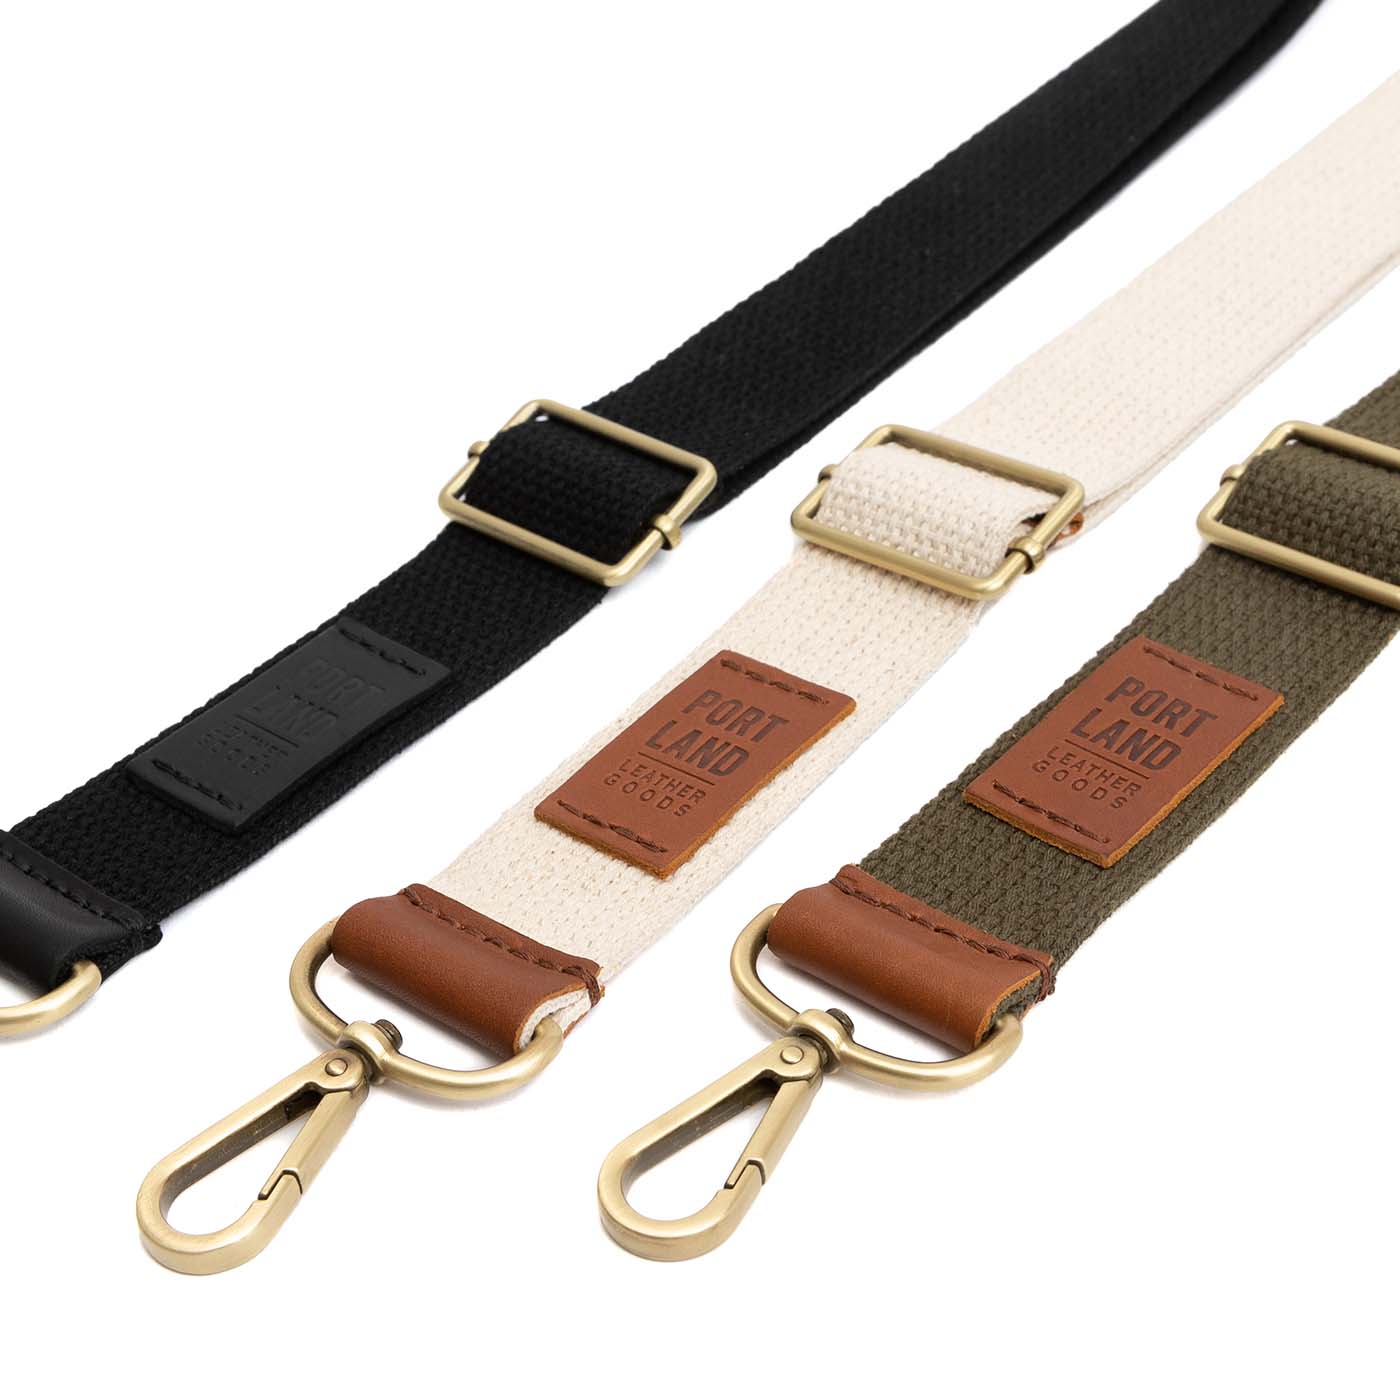 Leather Strap For Bags, classic bag strap